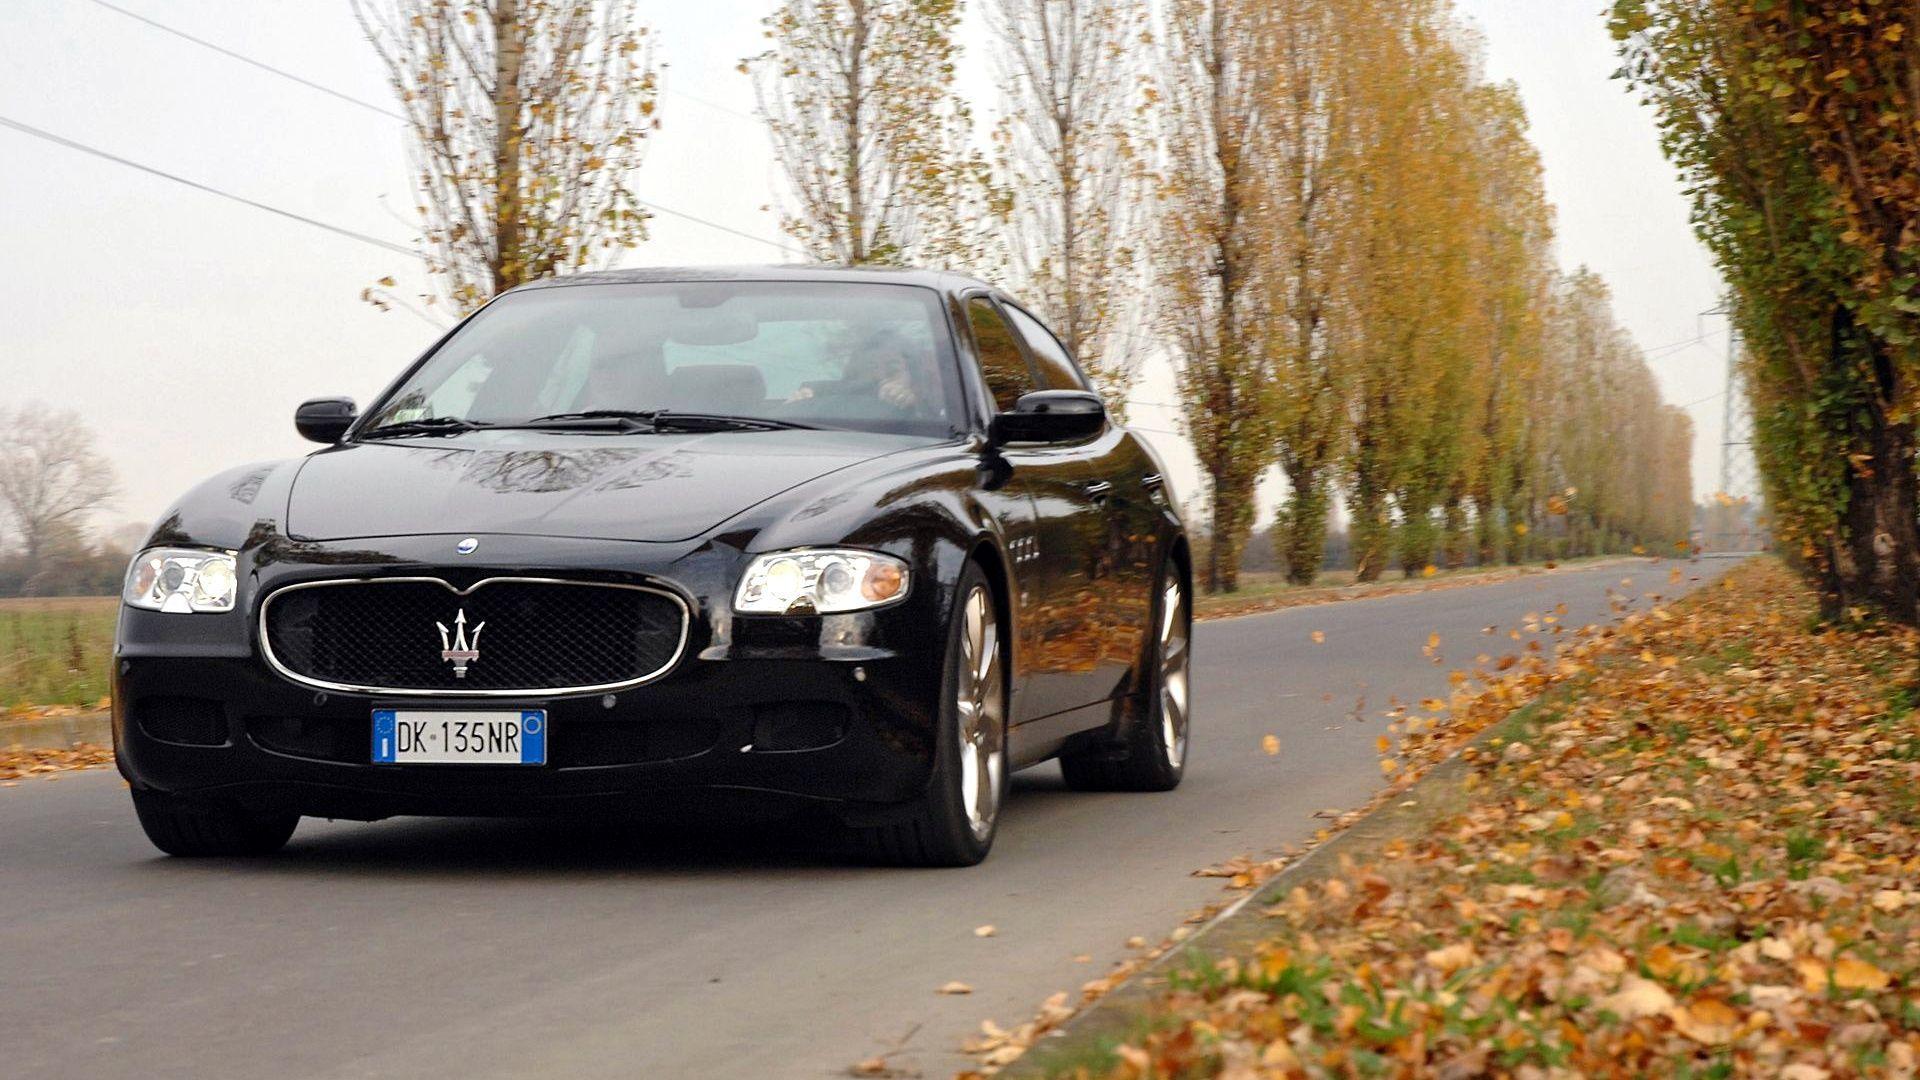 Maserati on HD Wallpaper background for your desktop. All